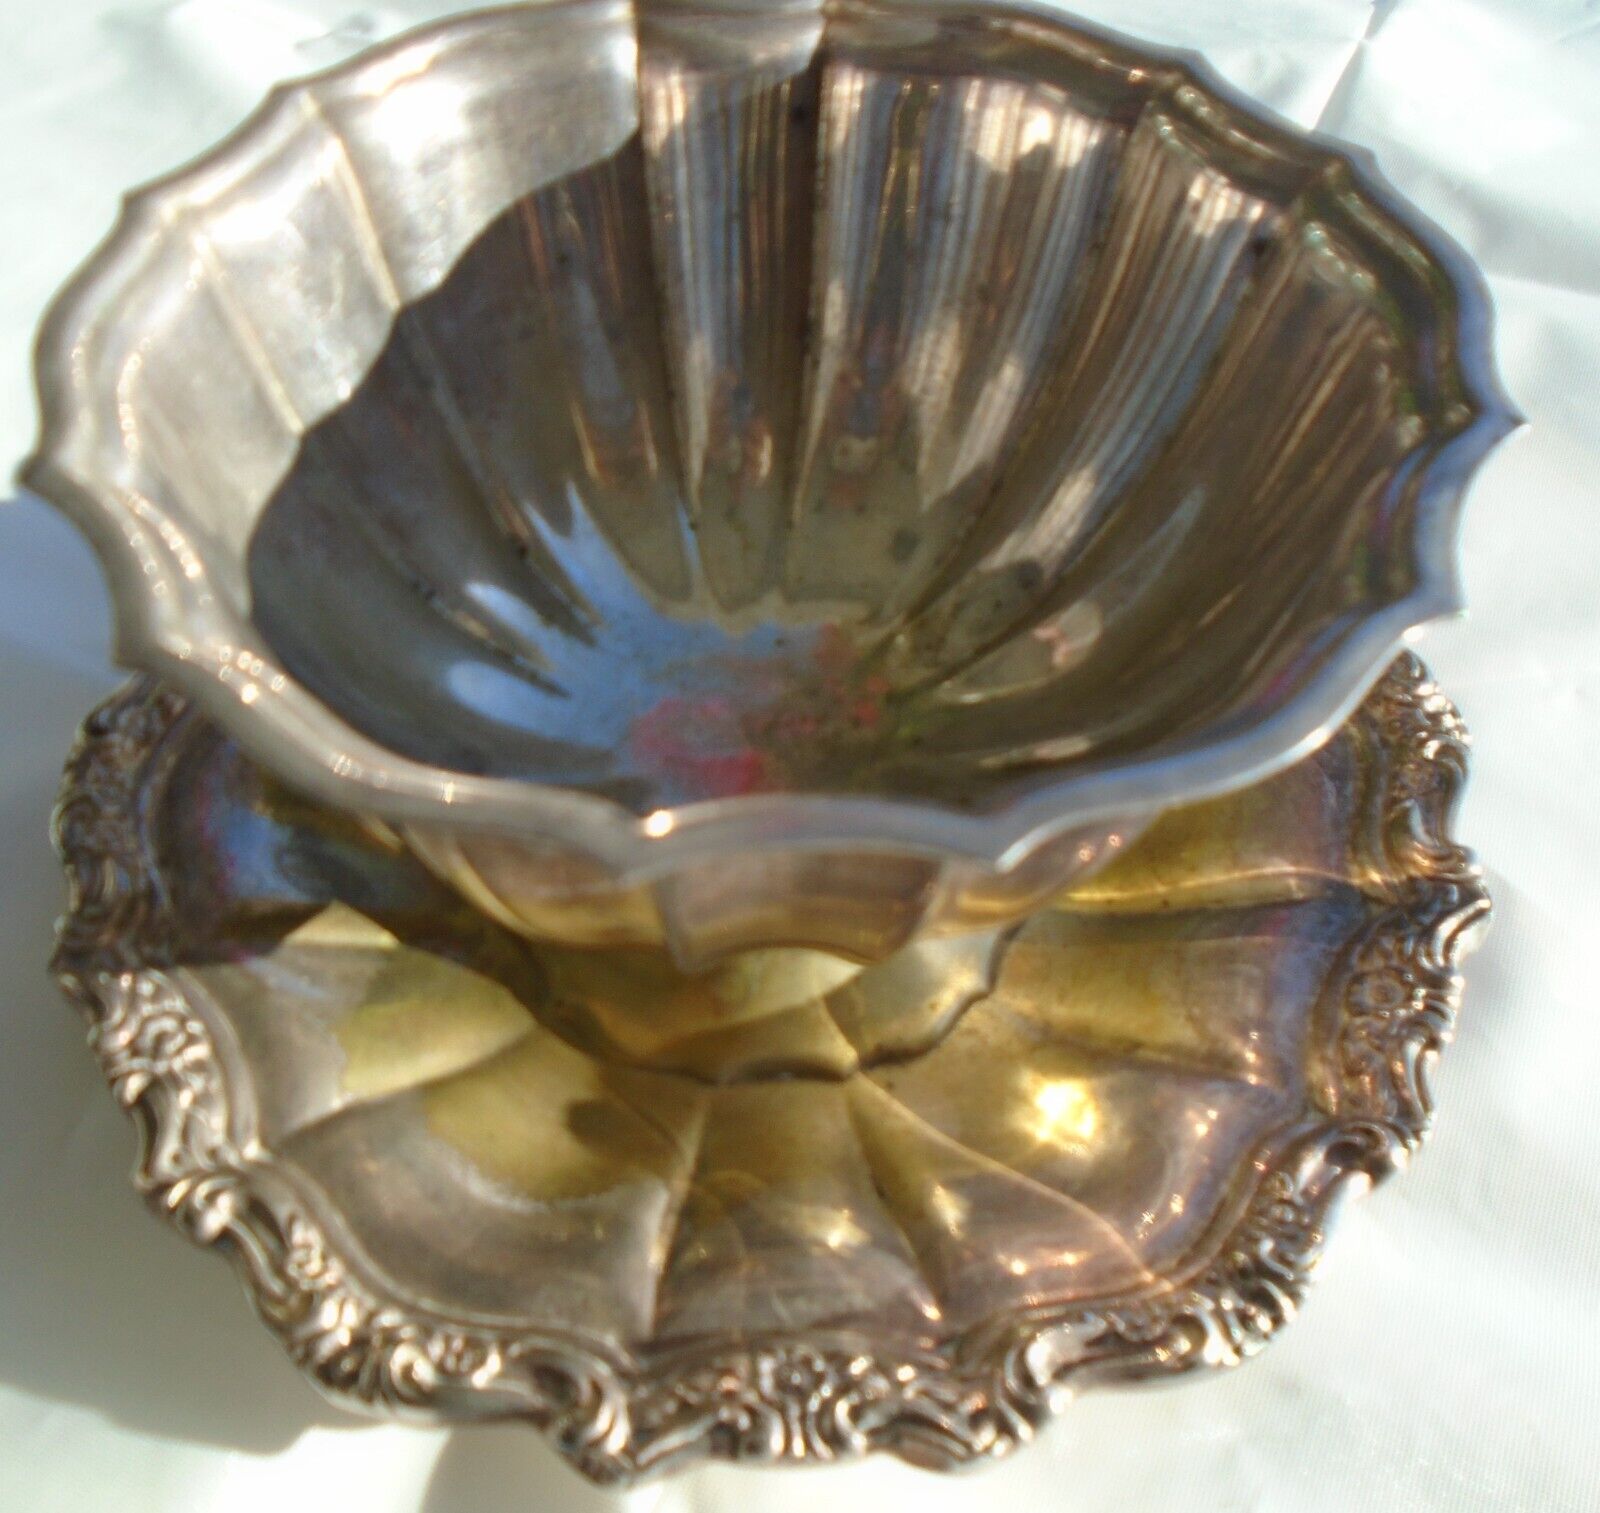 Gravy Boat Bowl International Floral Design Silverplate Attached Underplate